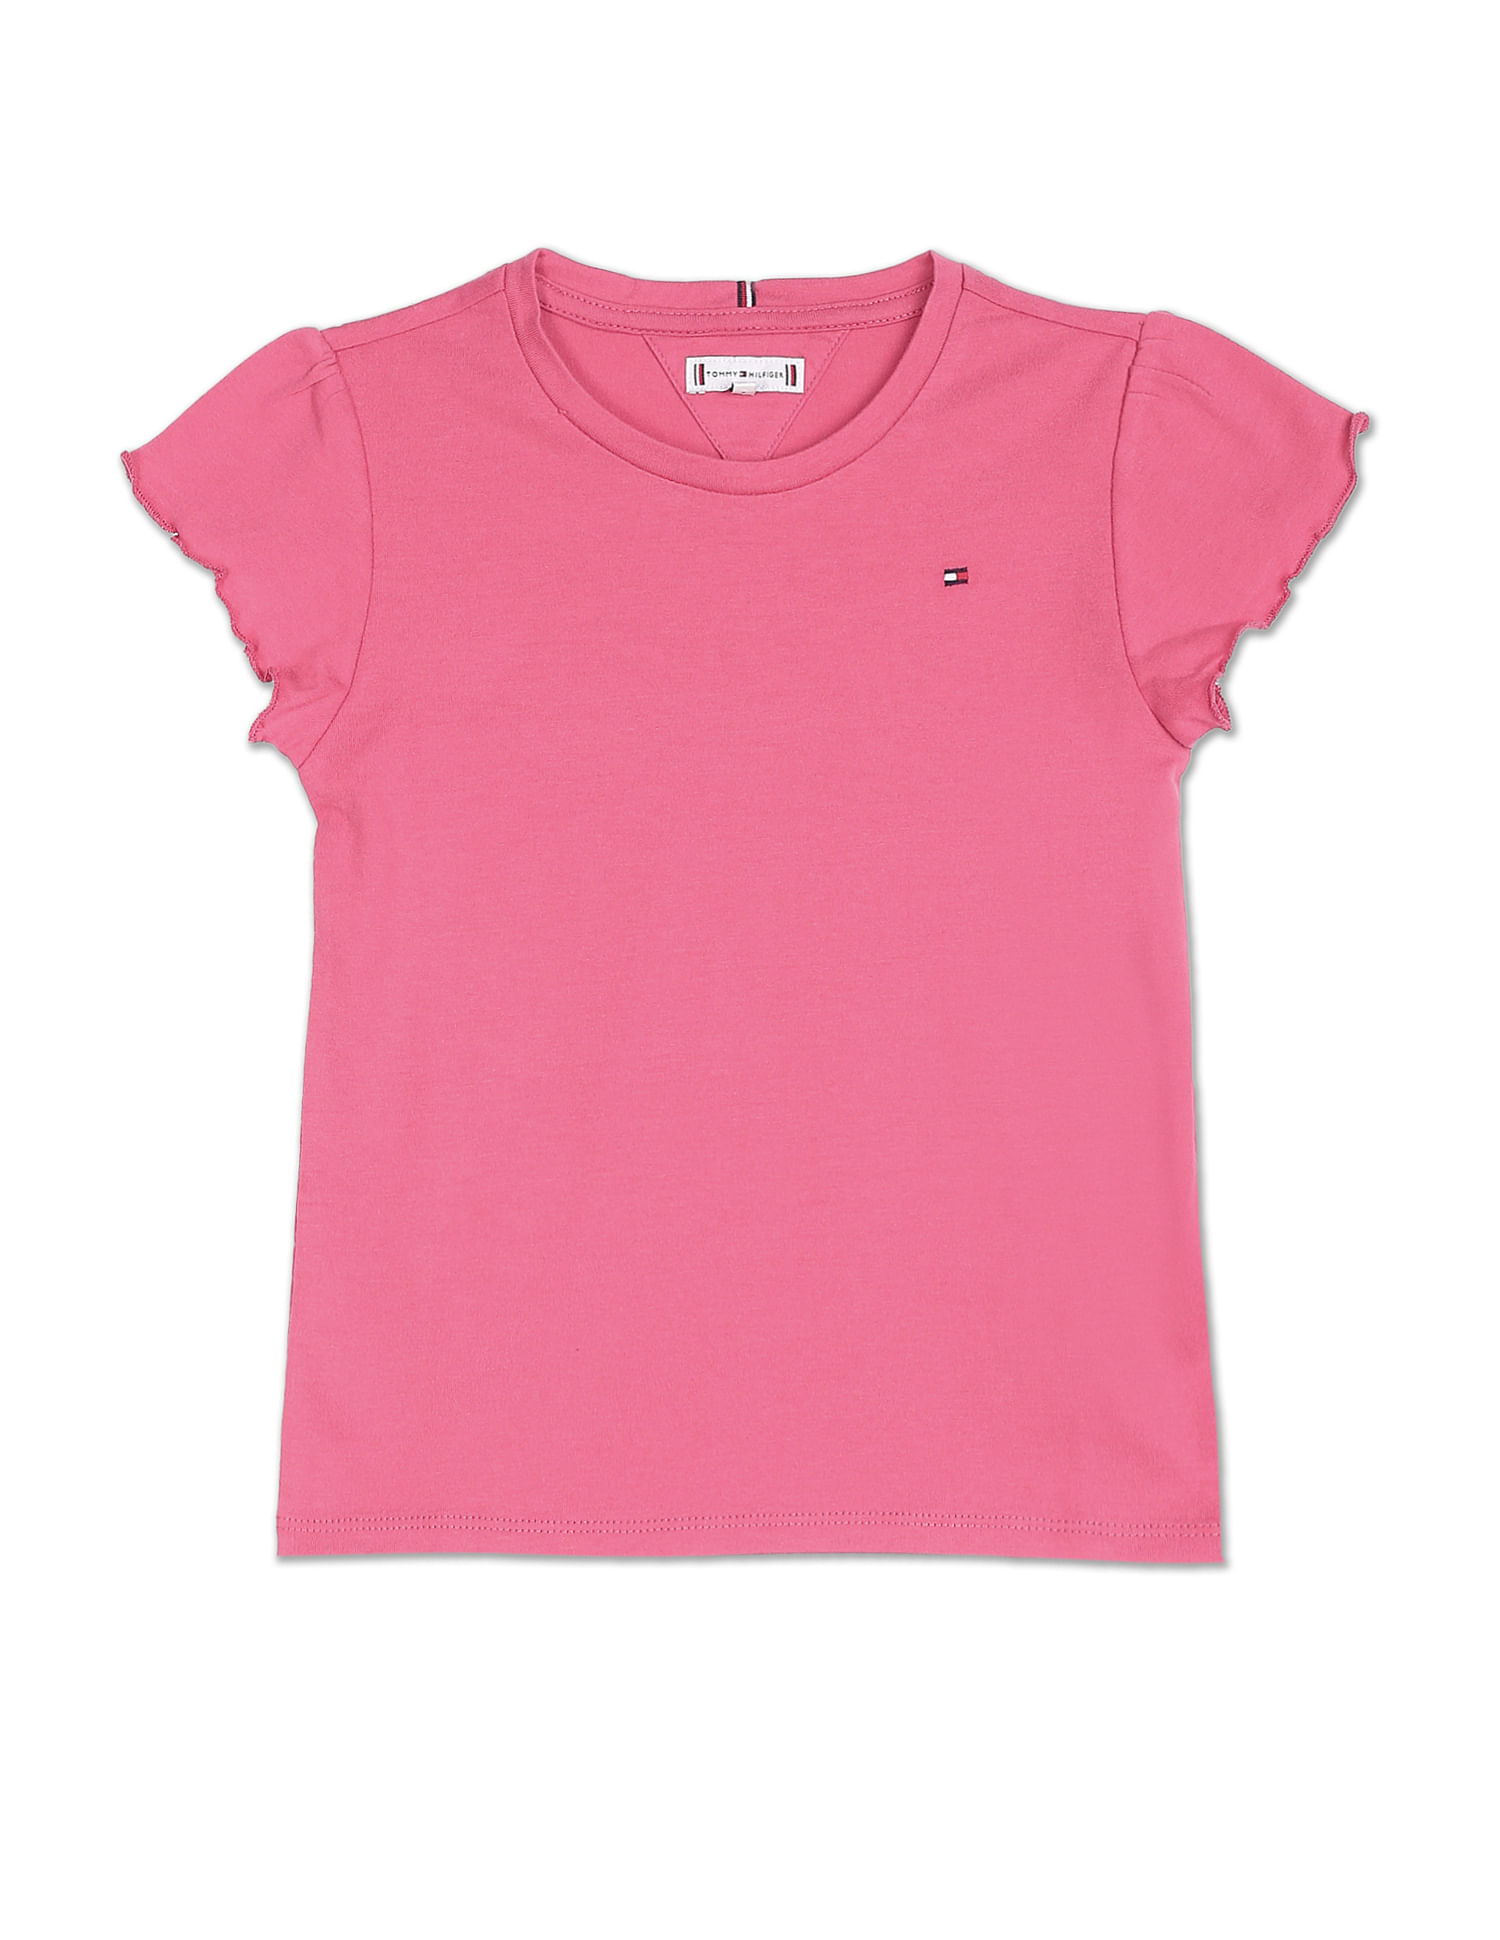 Buy Tommy Hilfiger Kids Ruffle Essential Cotton Sleeve T-Shirt